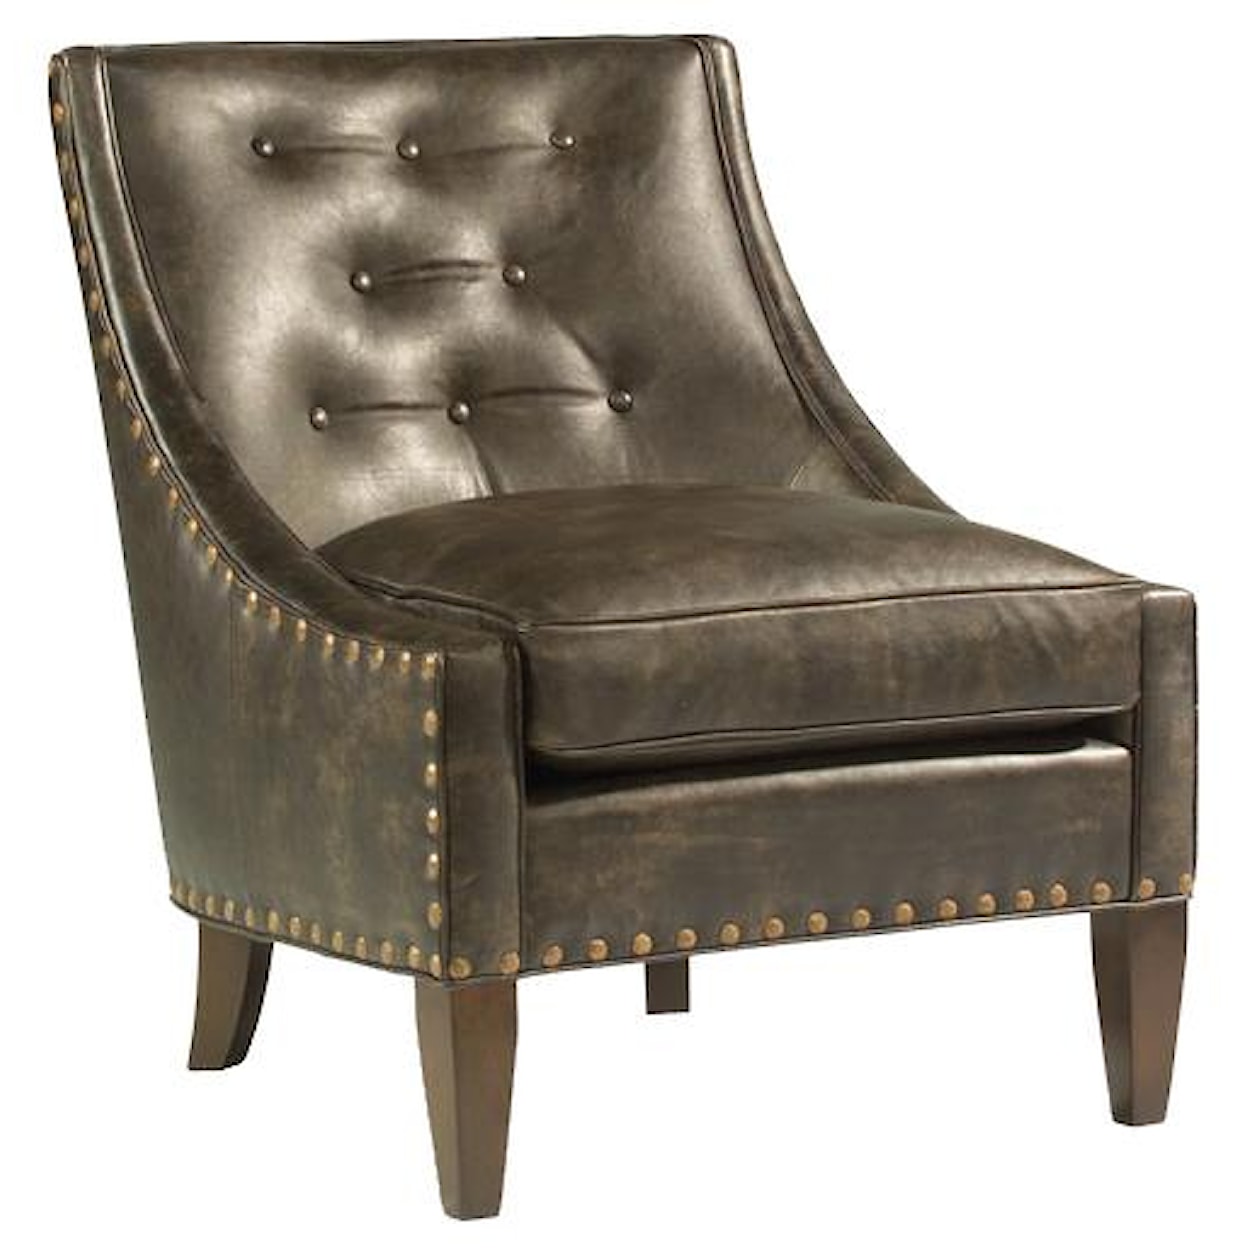 Taylor King Kings Road Chelsea Leather Chair